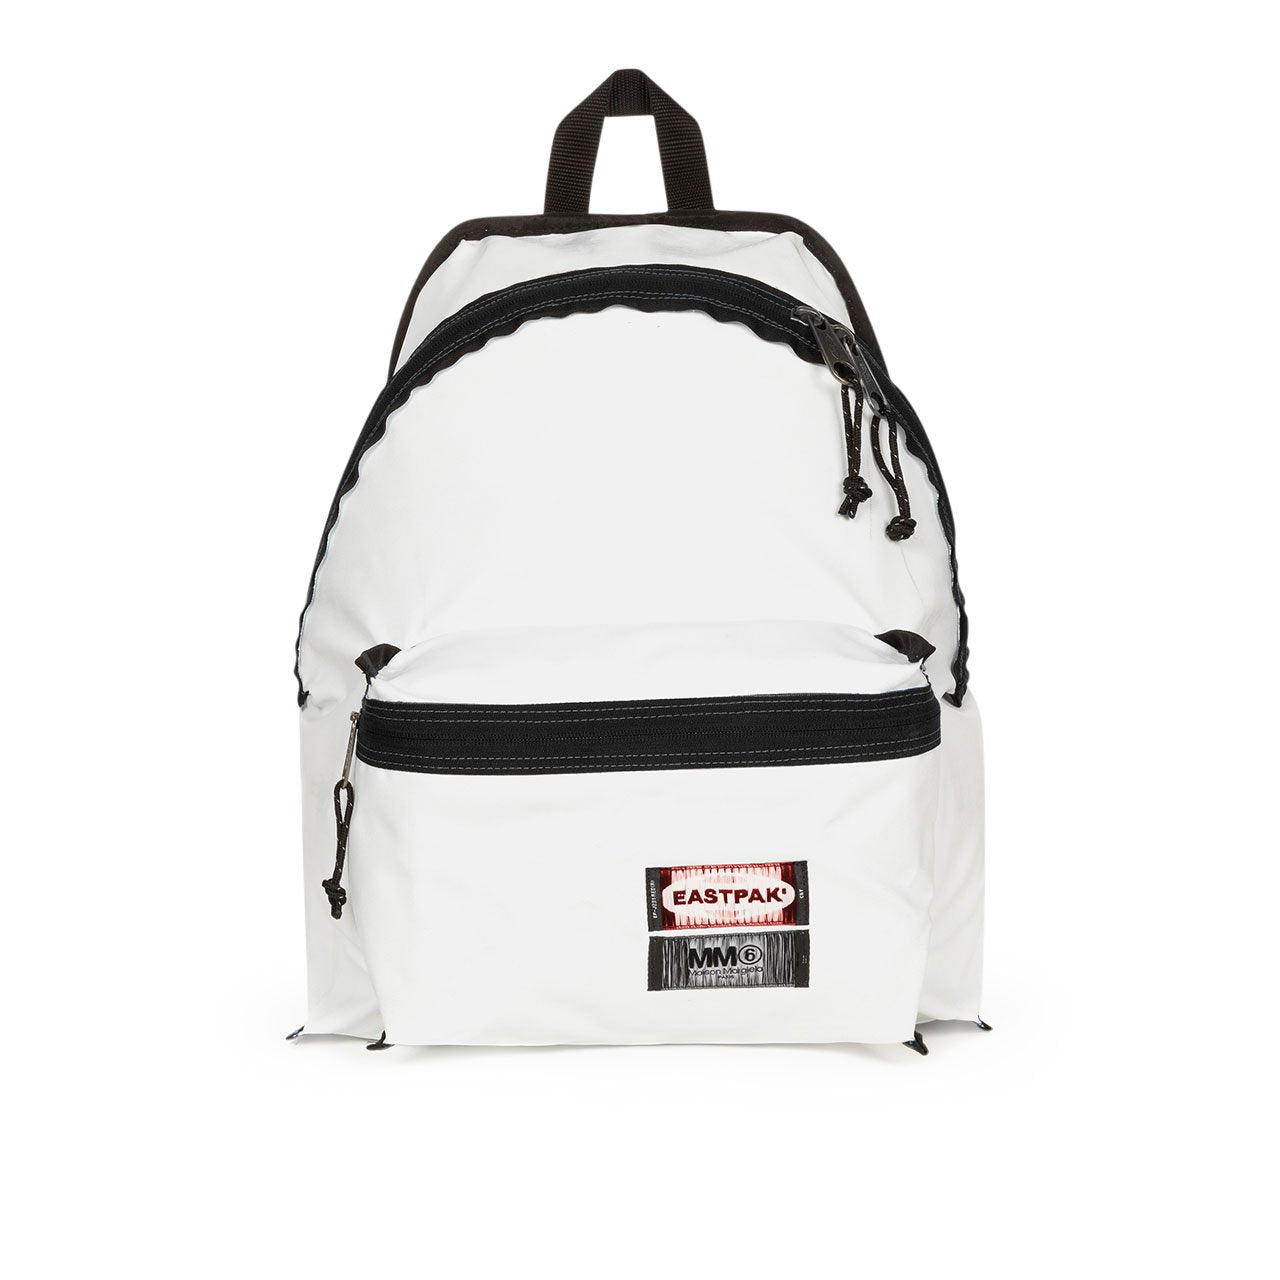 x mm6 padded reversible backpack | a.plus